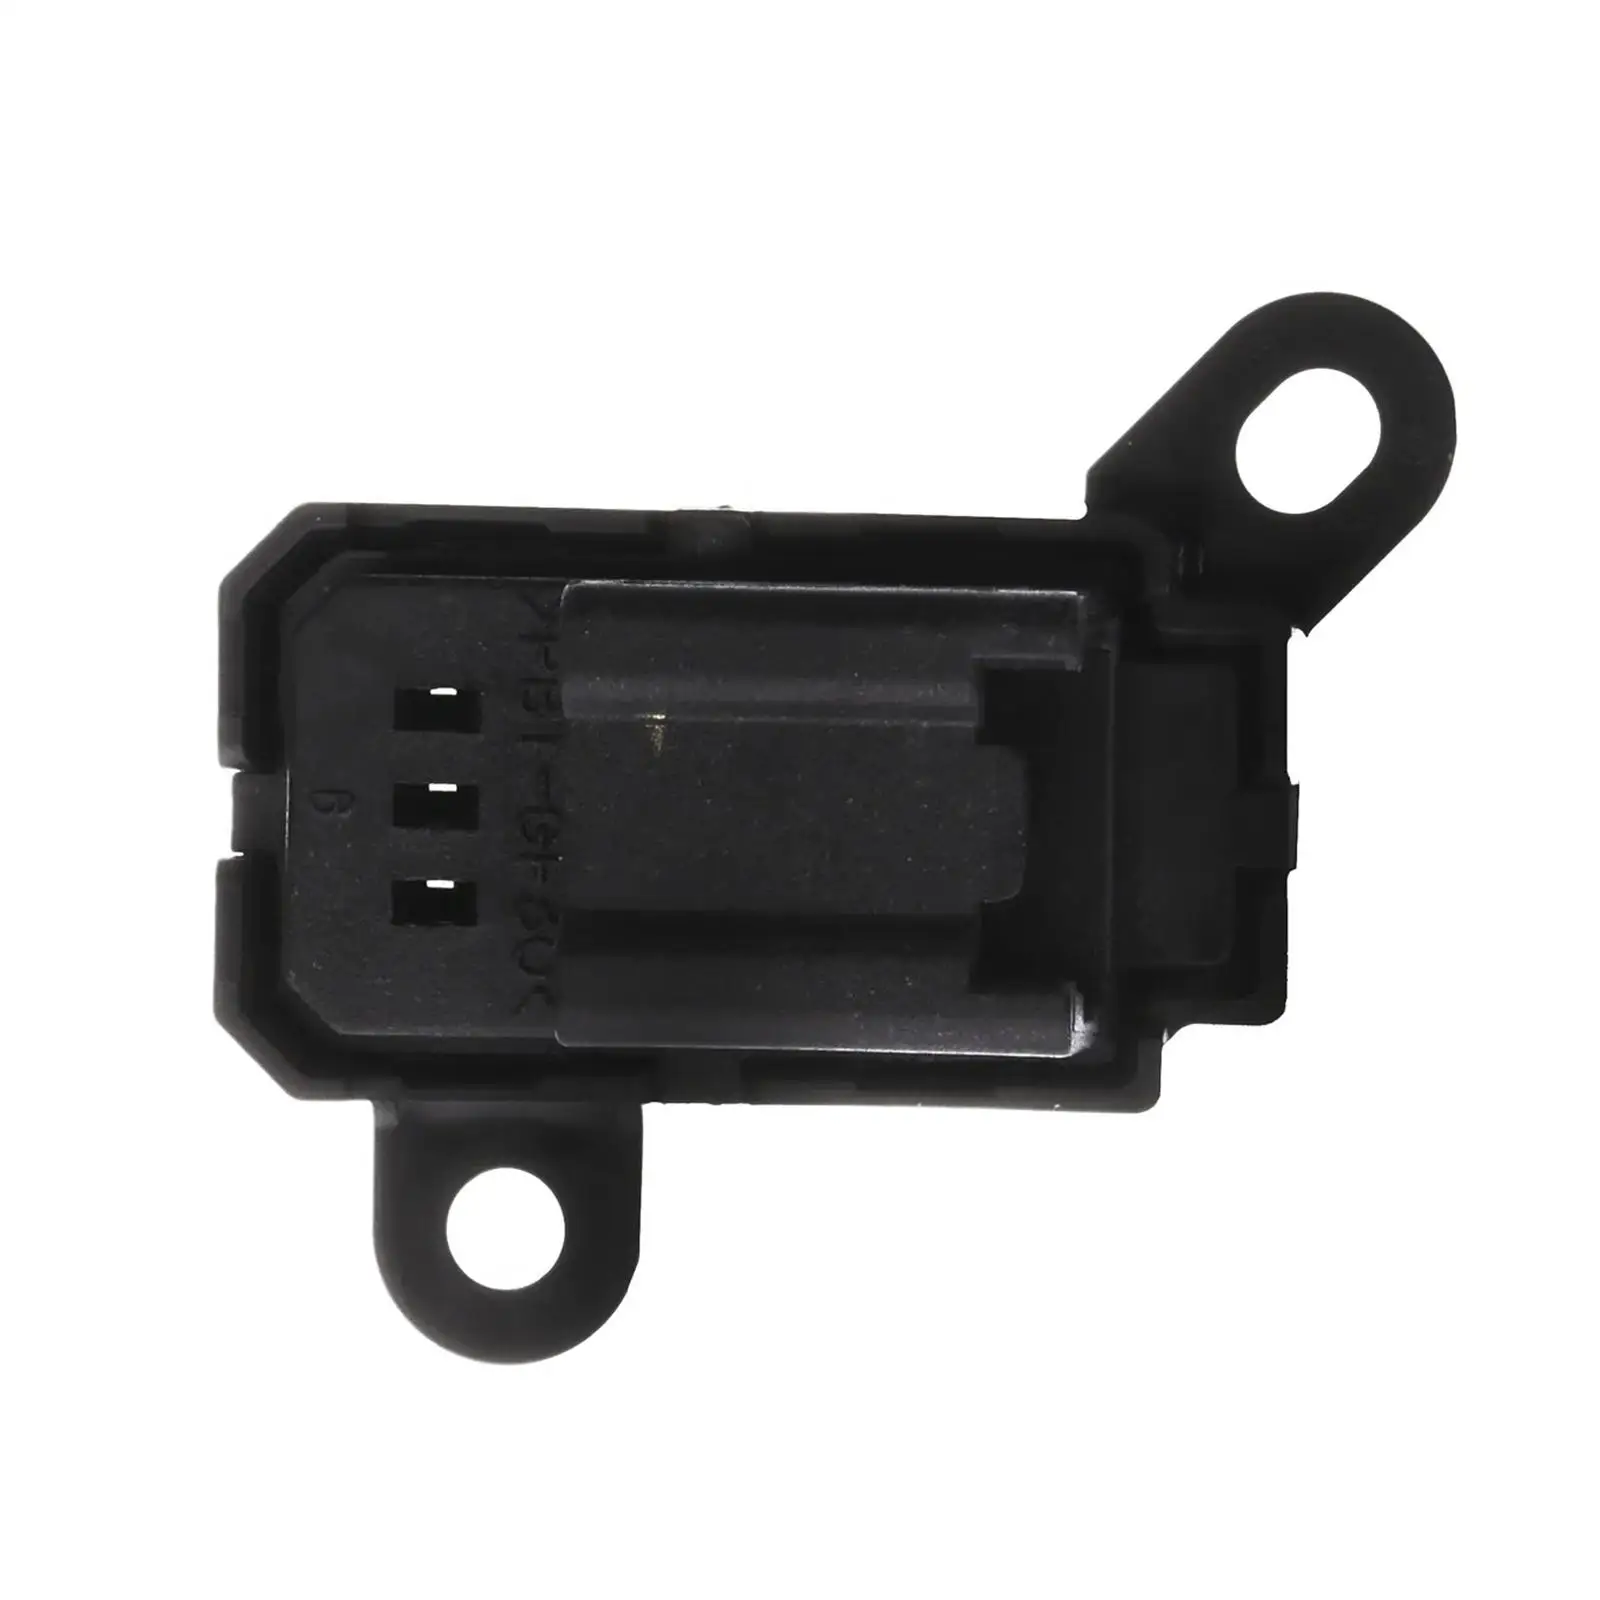 Gea3-66-660 Driver LH Front Door Lock Switch Button Spare Parts Premium High Performance Car Accessories Replaces